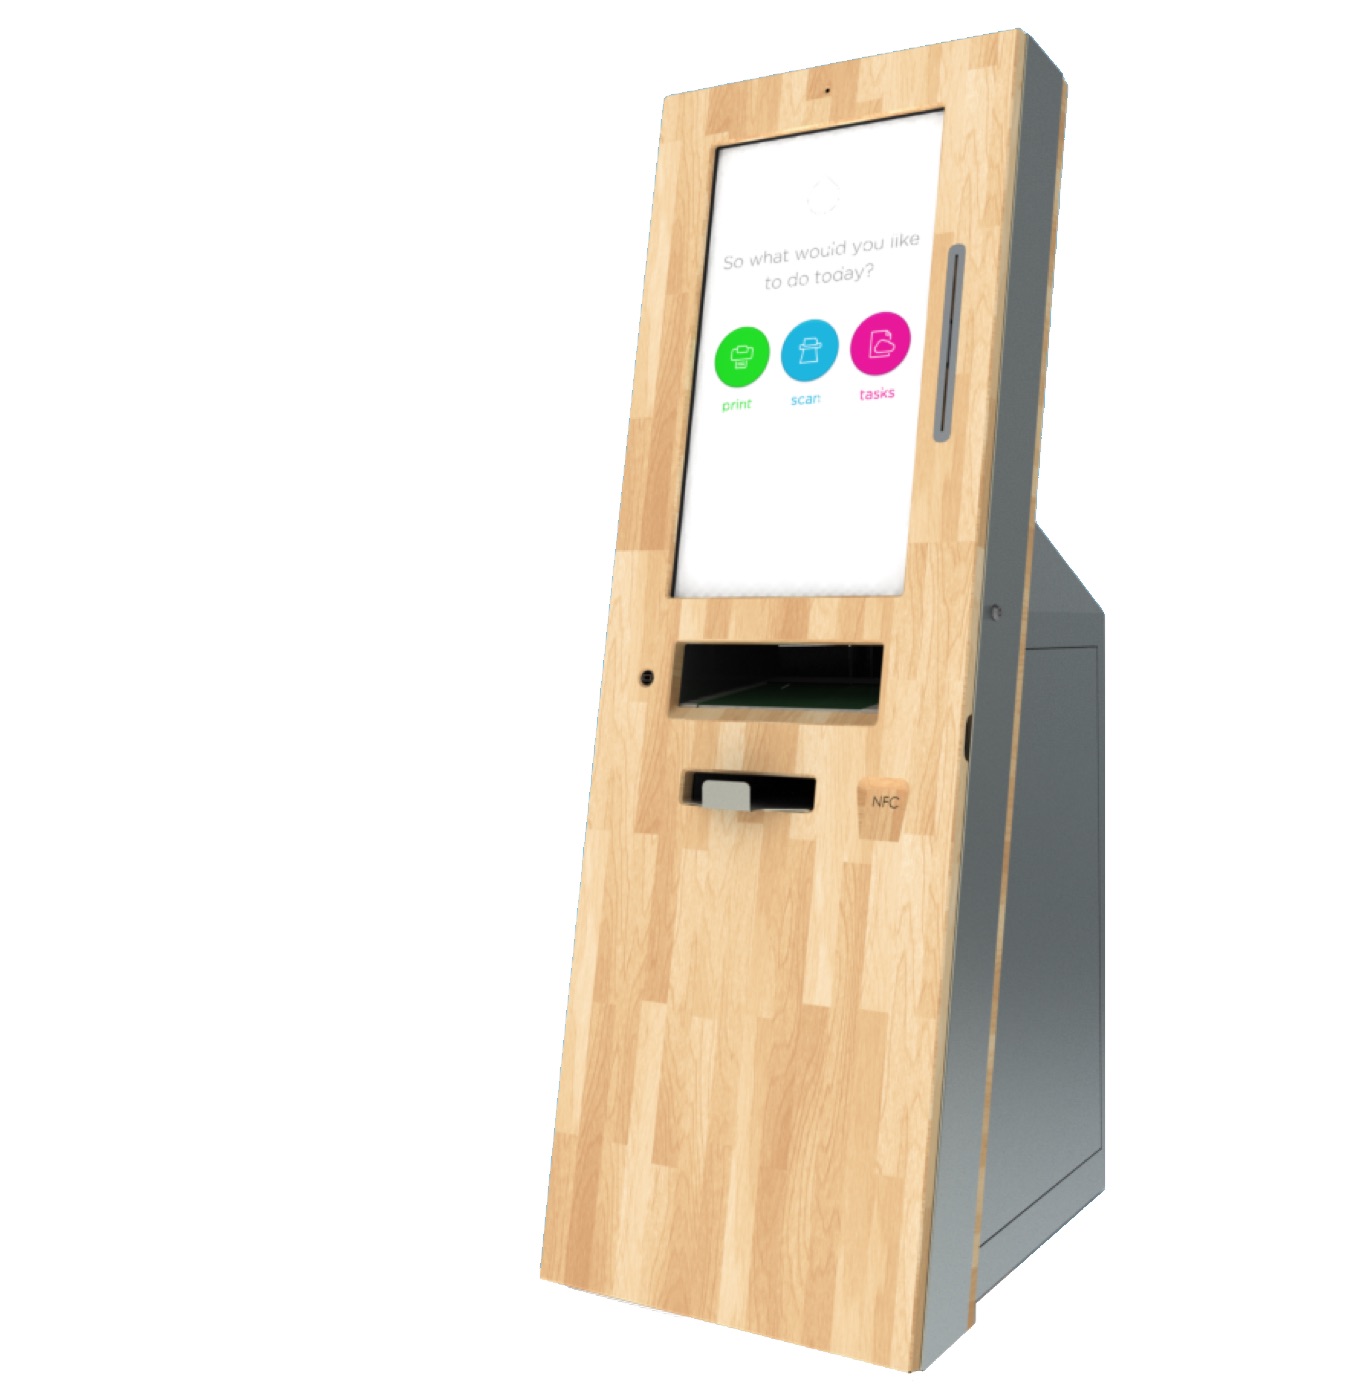 Kiosks are located across campus